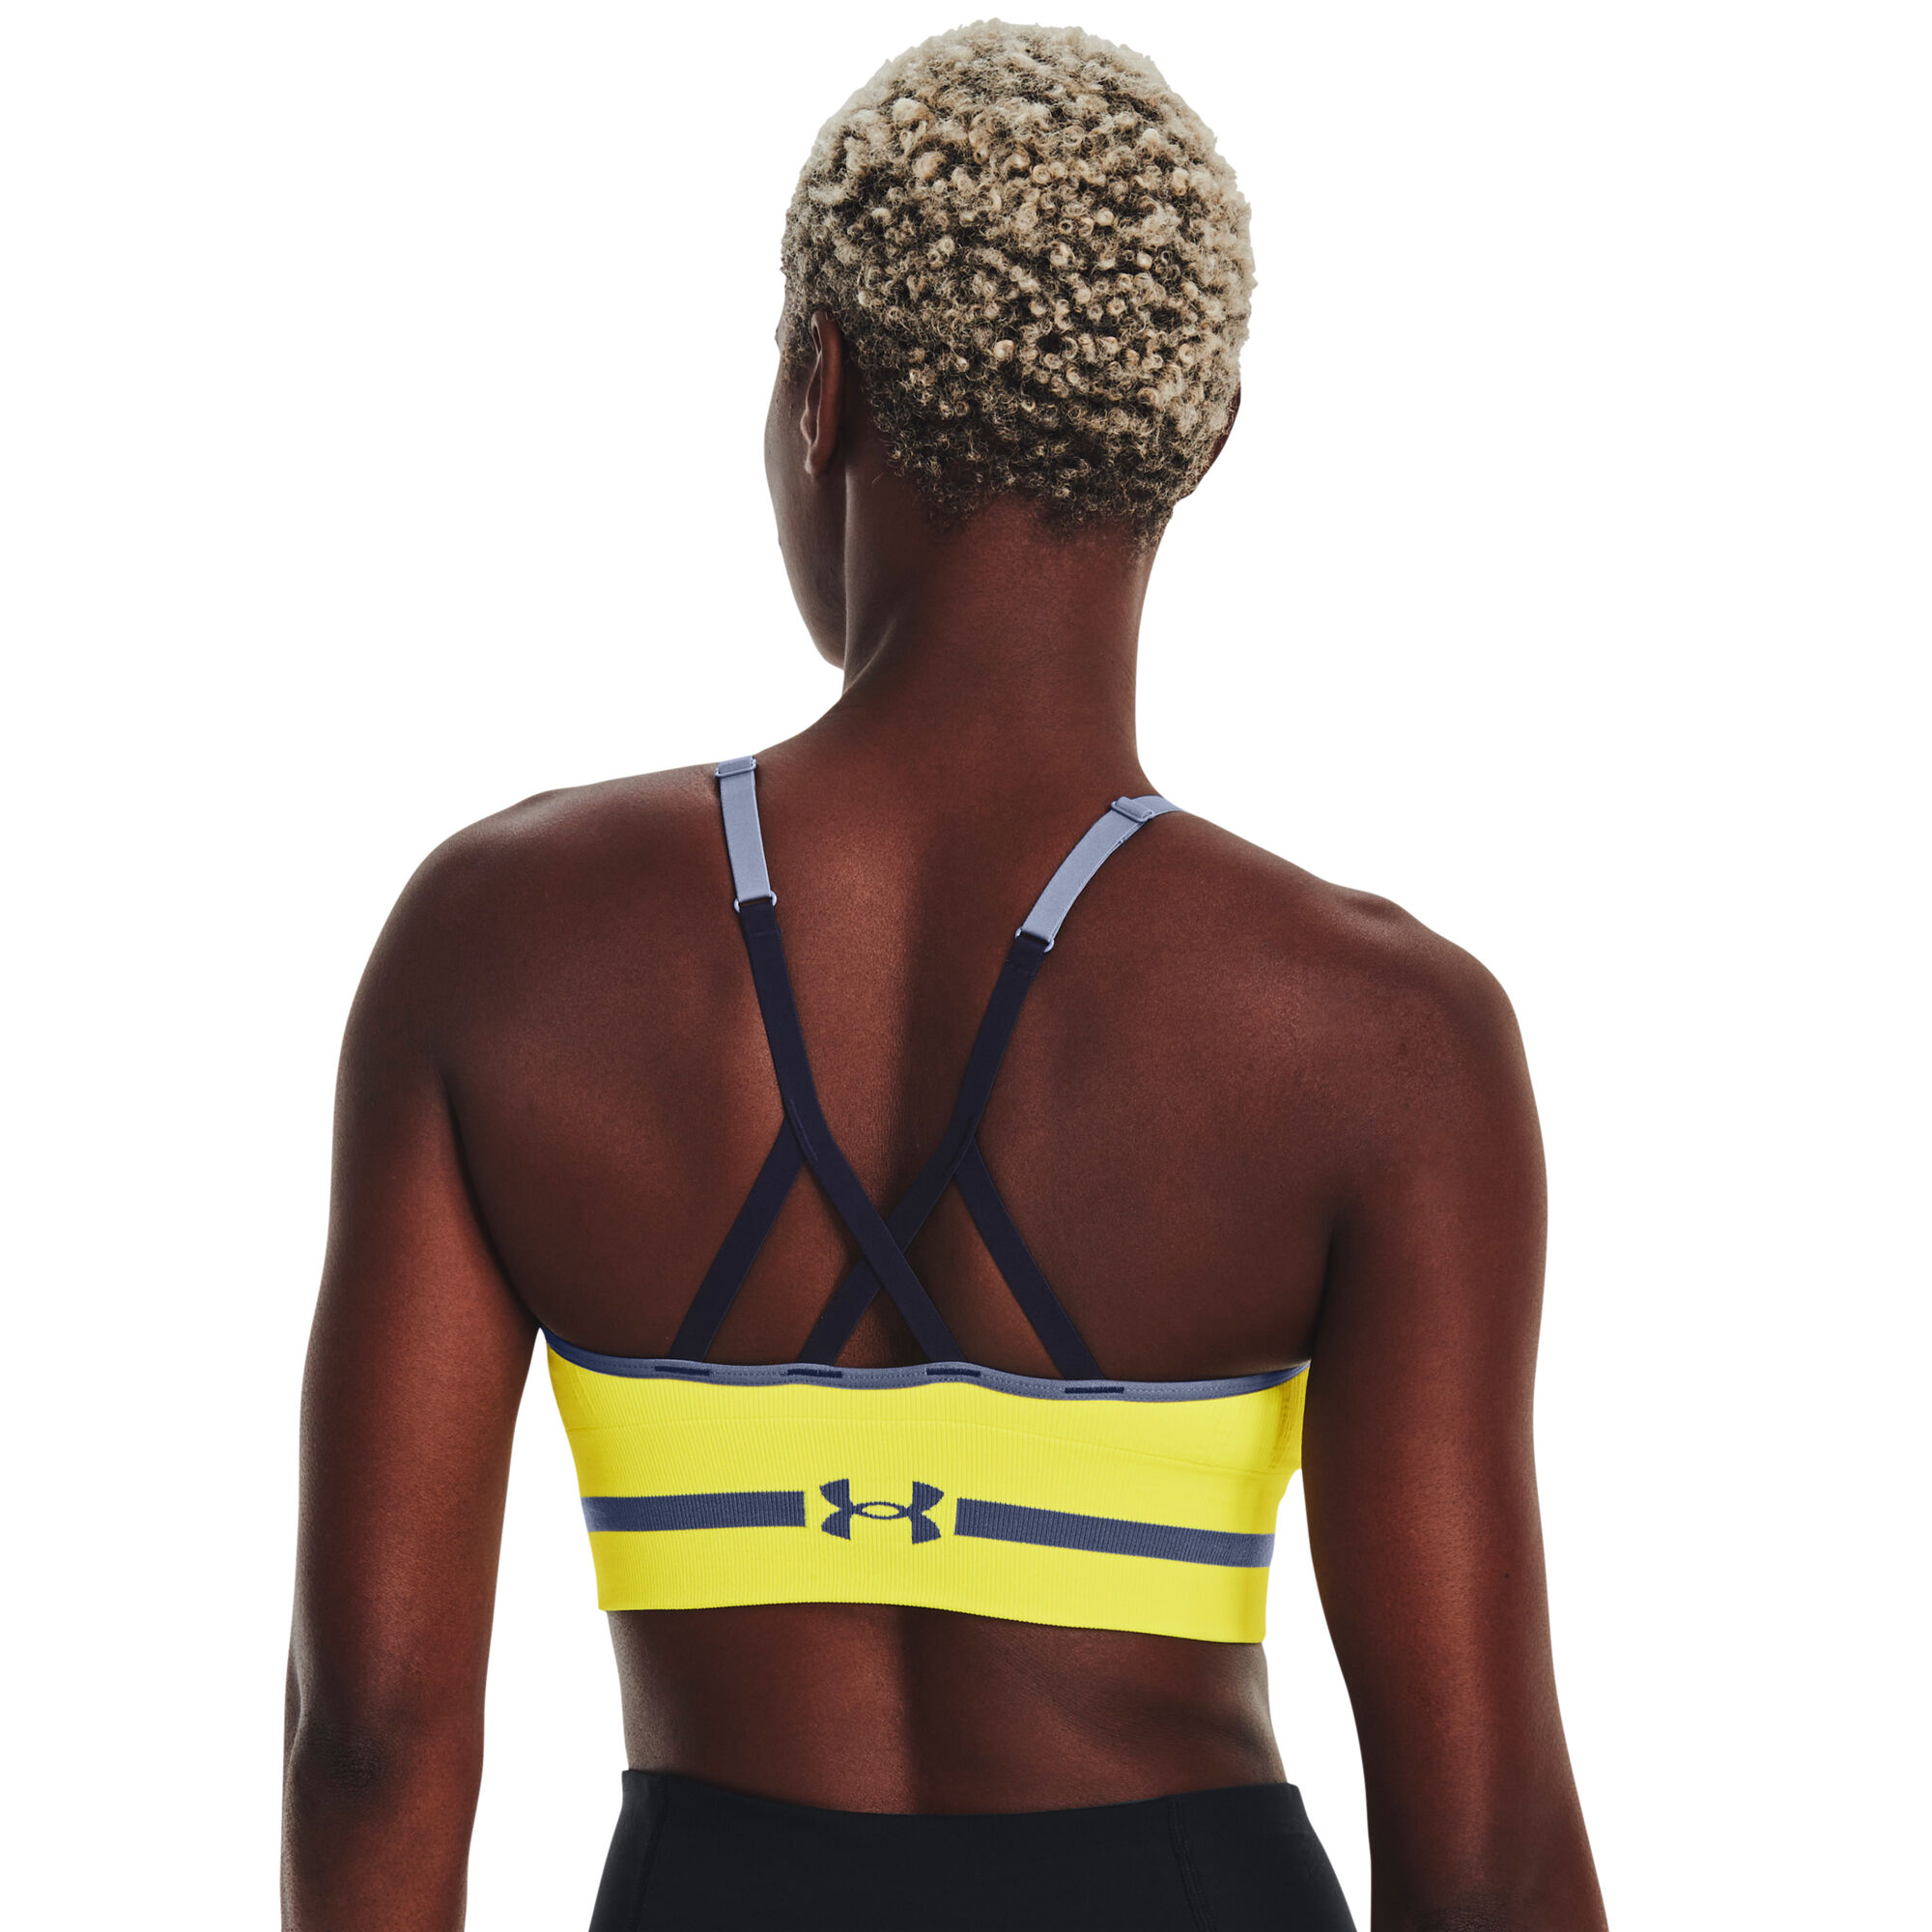 Buy Under Armour Seamless Low Long Sports Bras Women Yellow online